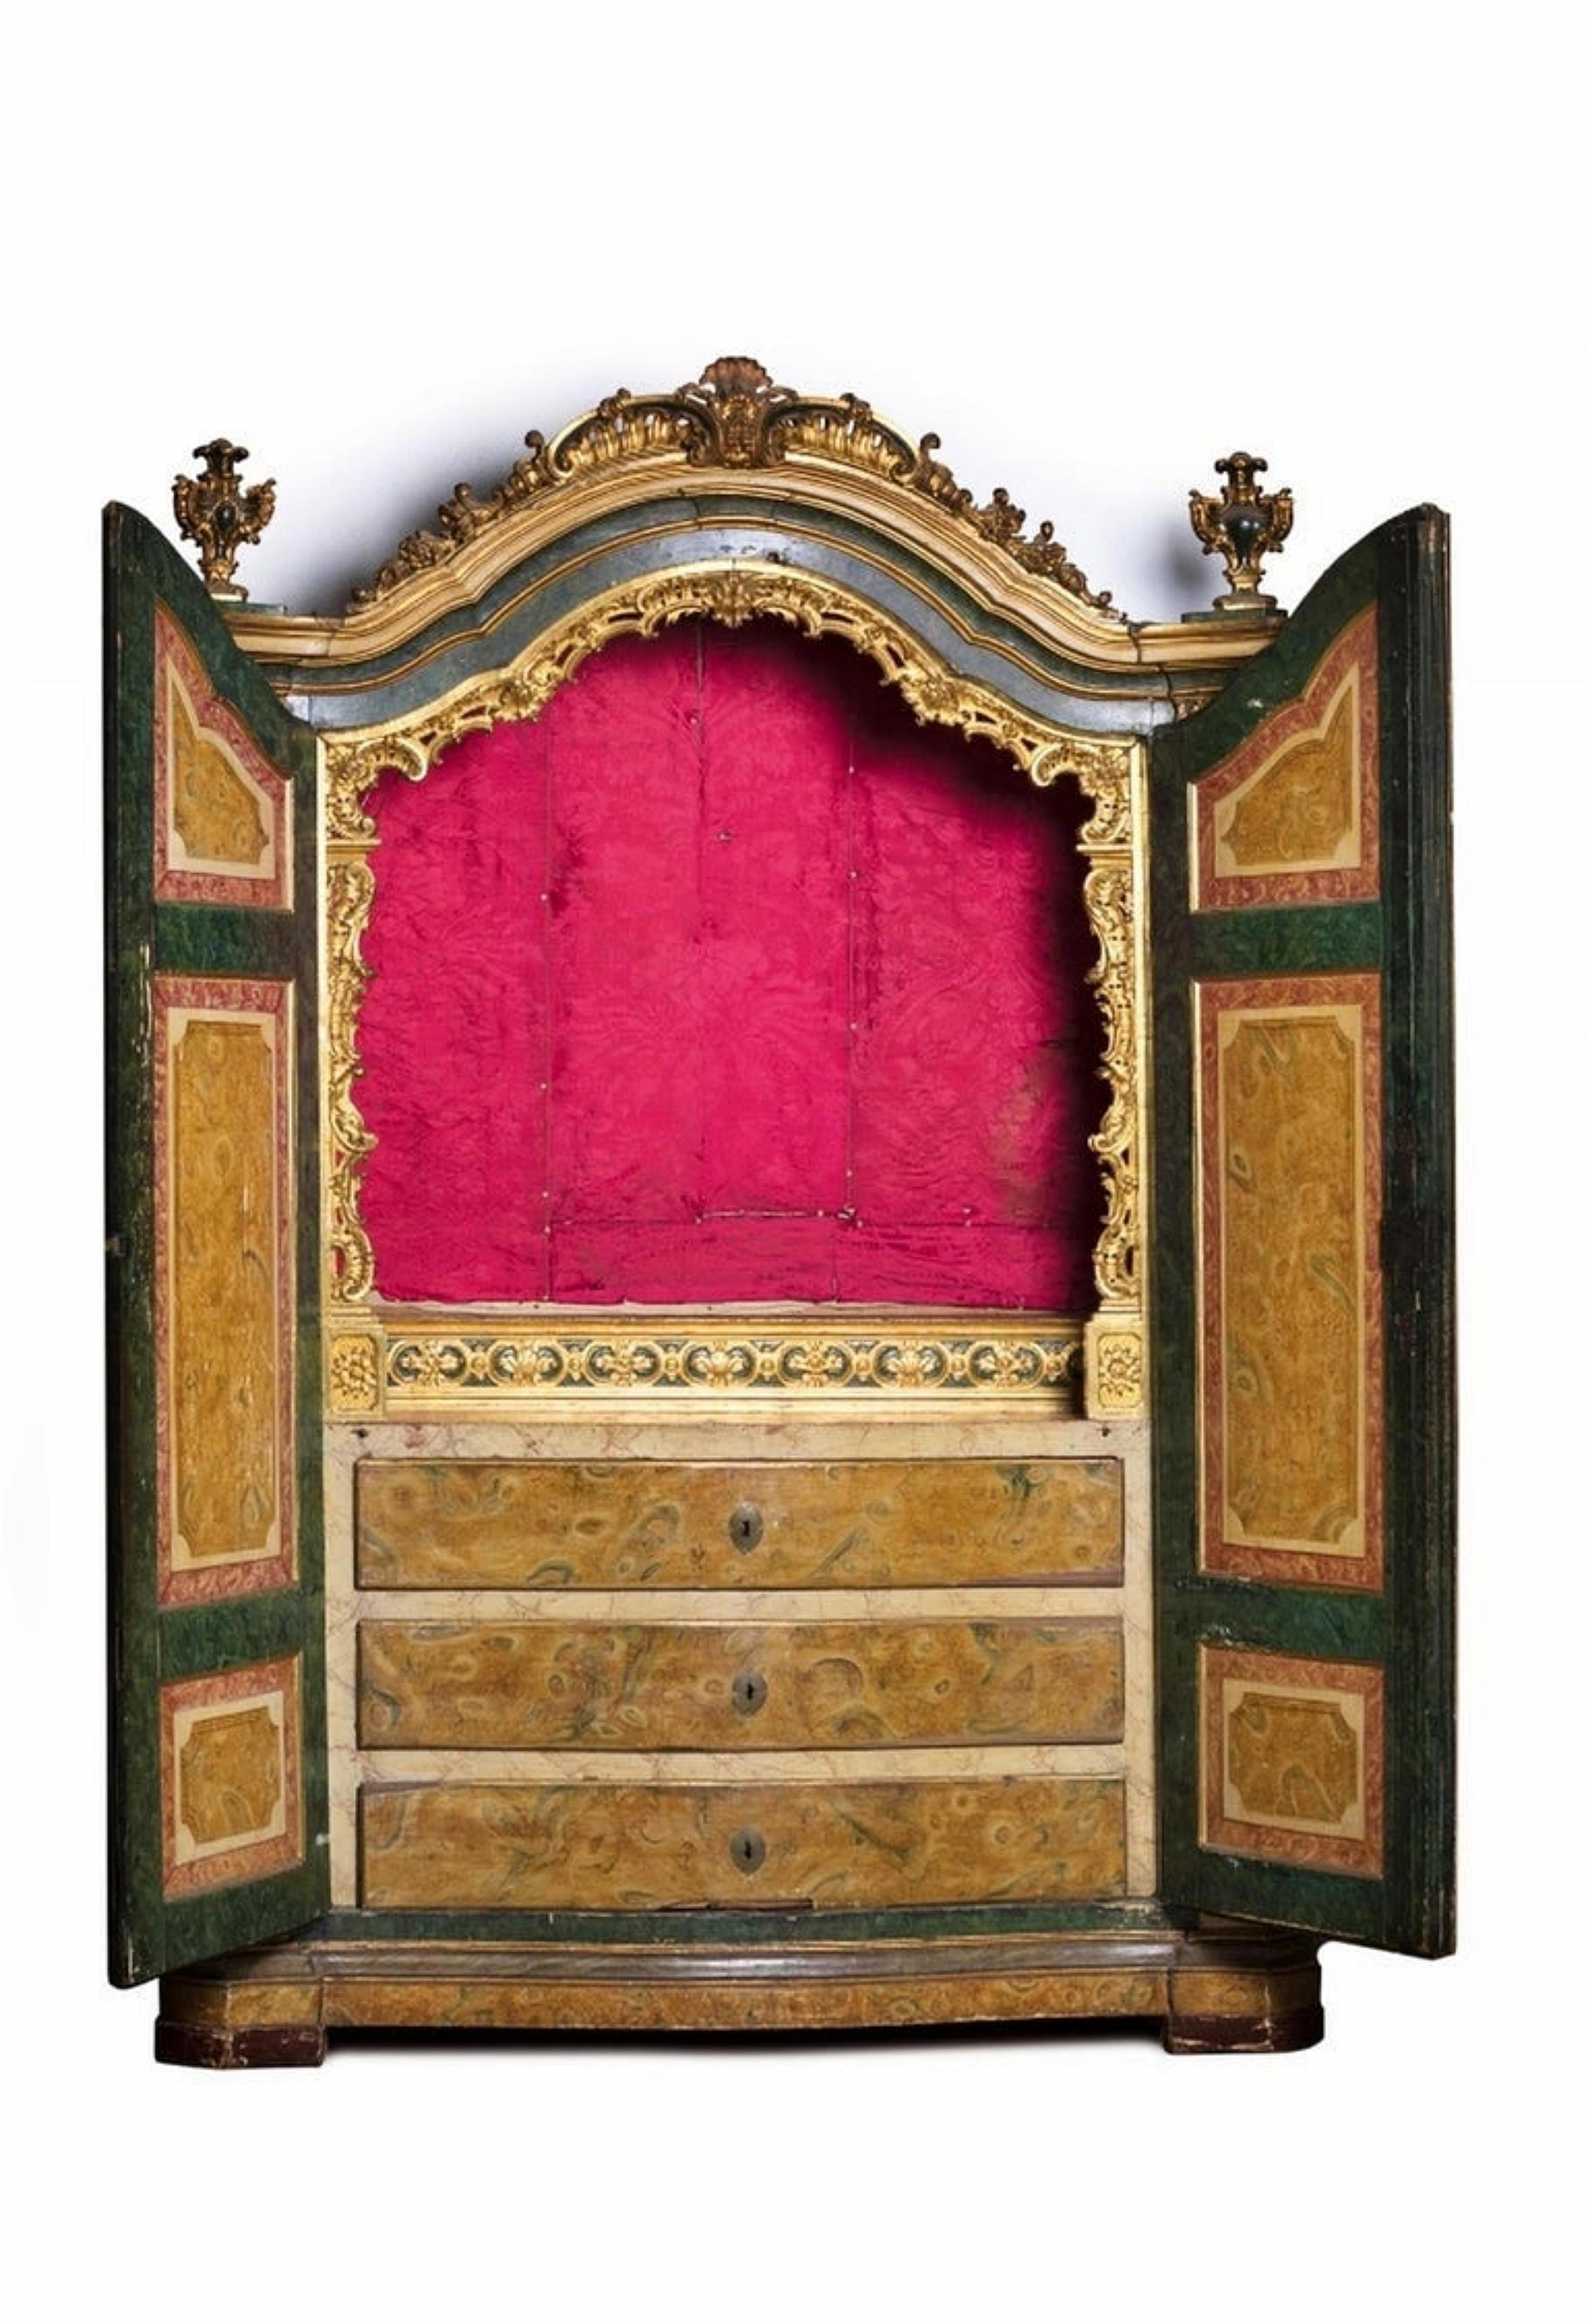 Baroque Rare and Important Portuguese Church Cabinet 18th Century Published